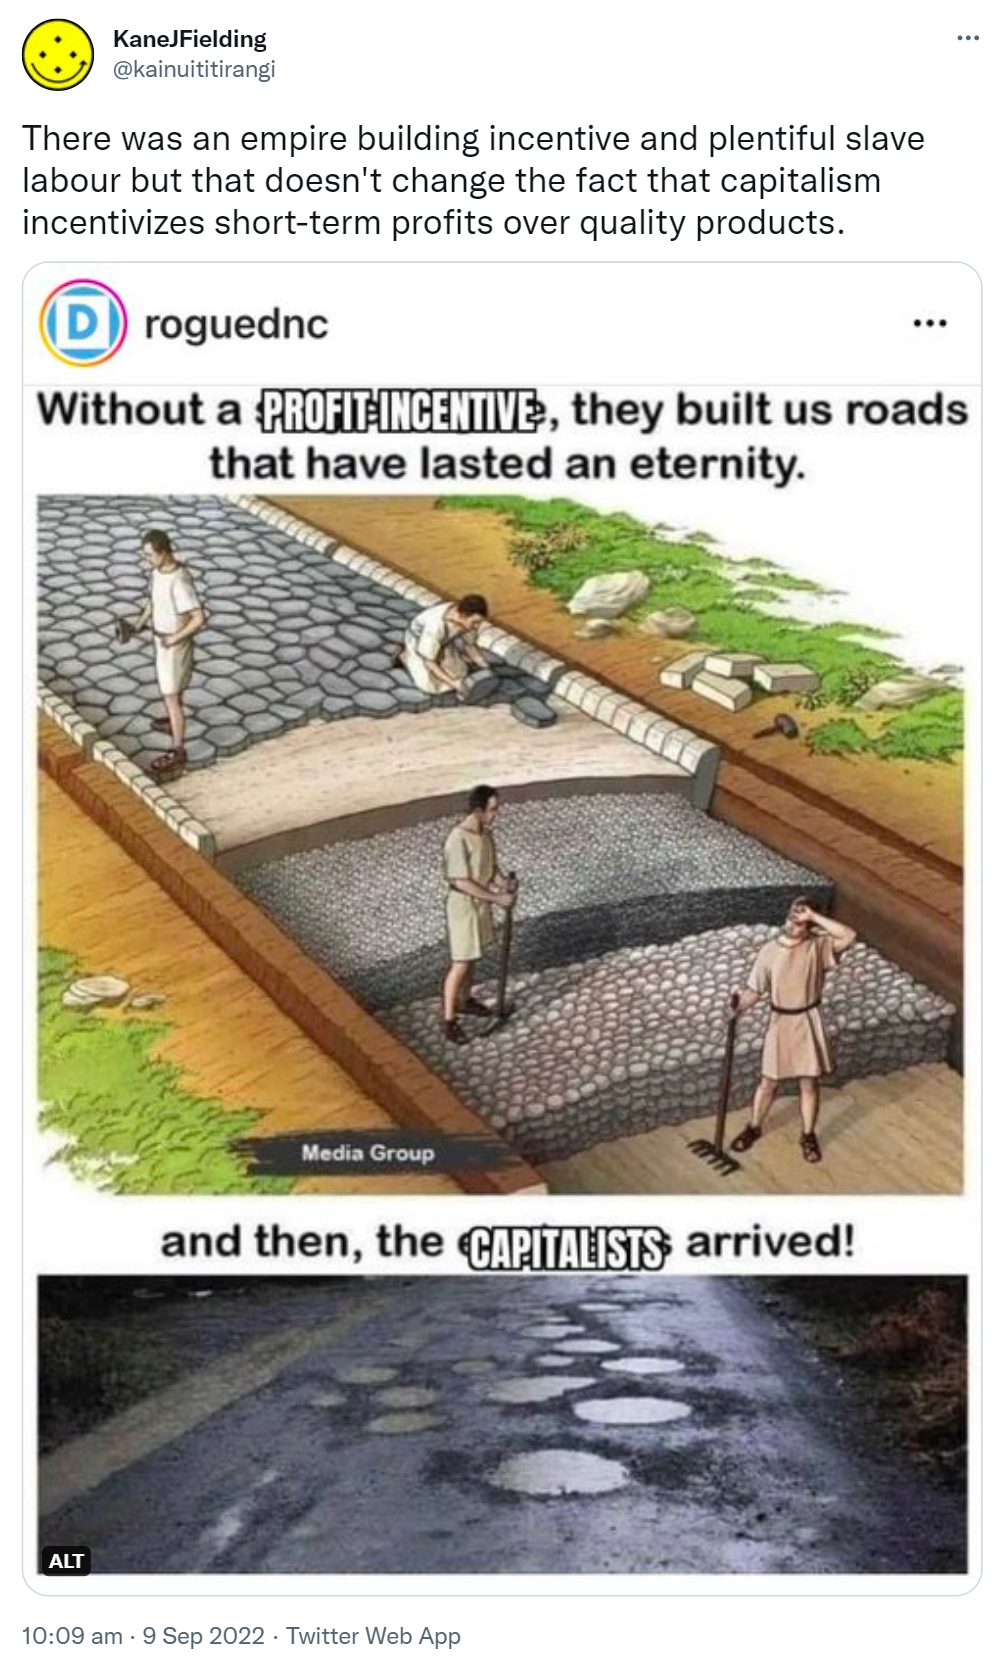 There was an empire building incentive and plentiful slave labour but that doesn't change the fact that capitalism incentivizes short-term profits over quality products. Without a profit incentive, they built us roads that have lasted an eternity. And then, capitalists arrived! 10:09 am · 9 Sep 2022.